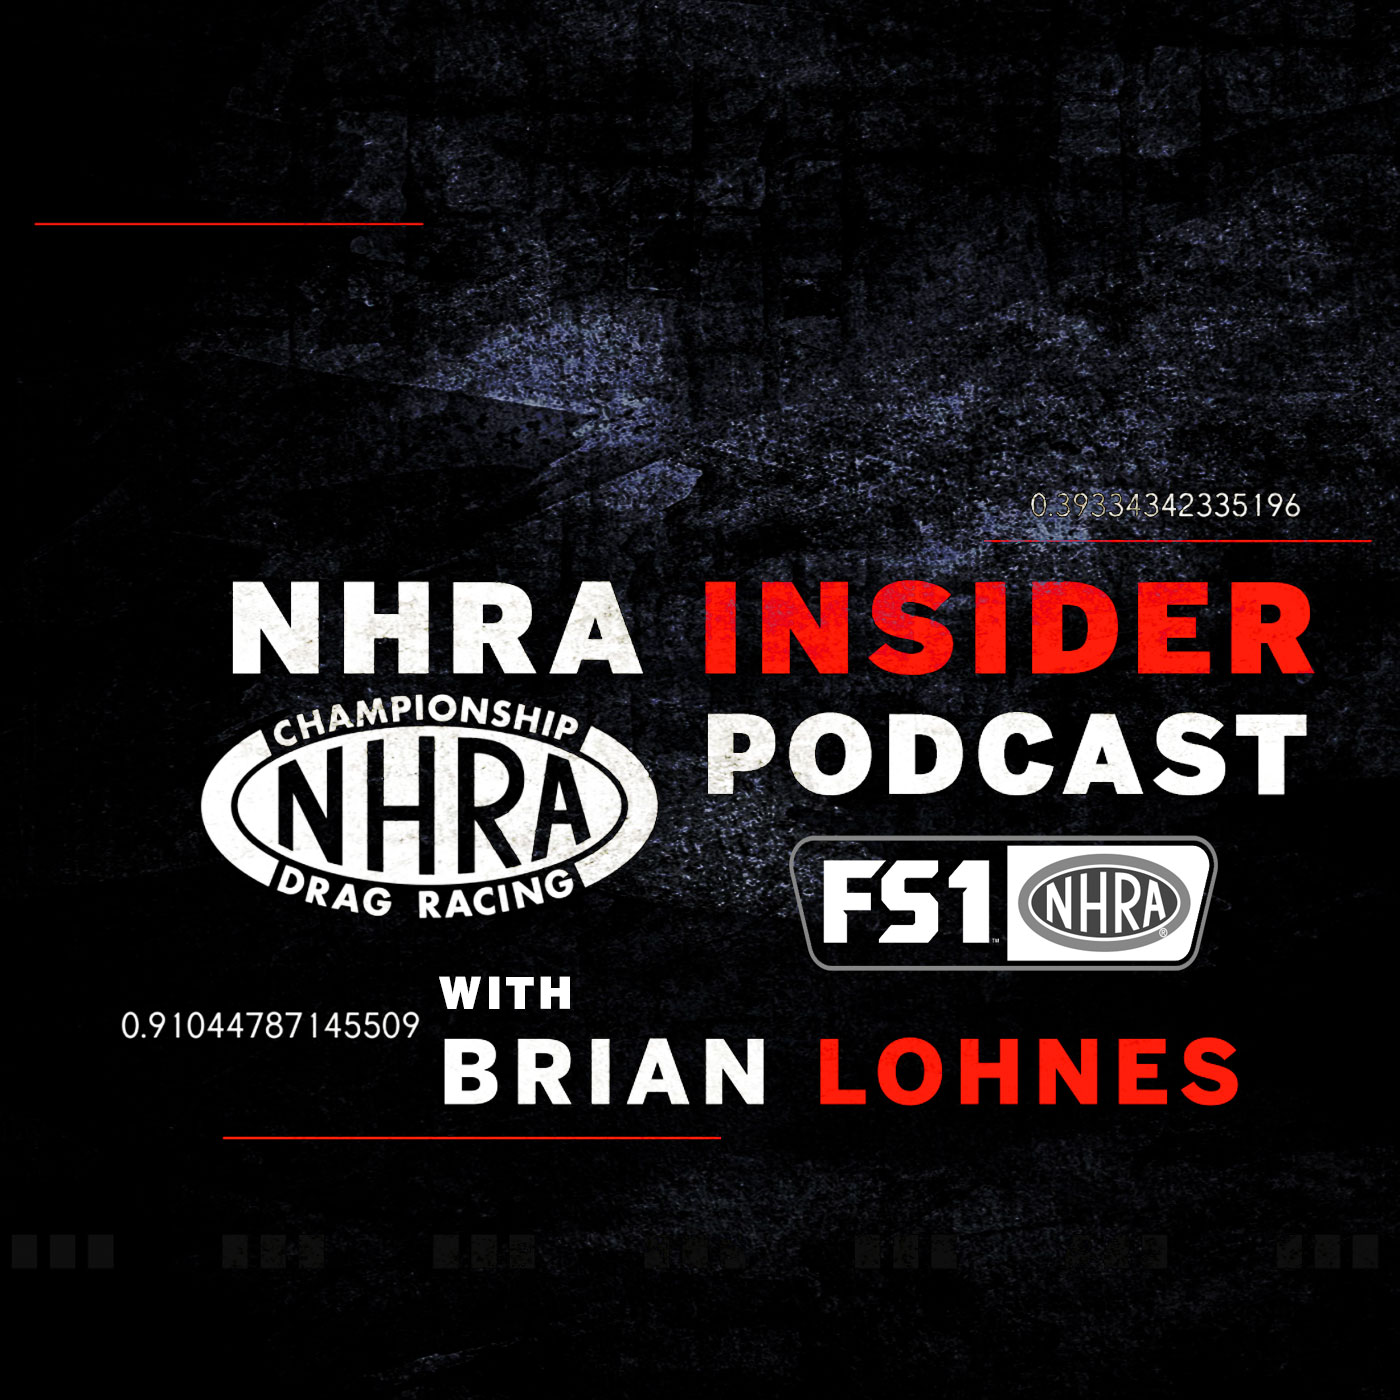 Listen UP: Alexis DeJoria and Clay Millican Are On The NHRA Insider Podcast This Week!